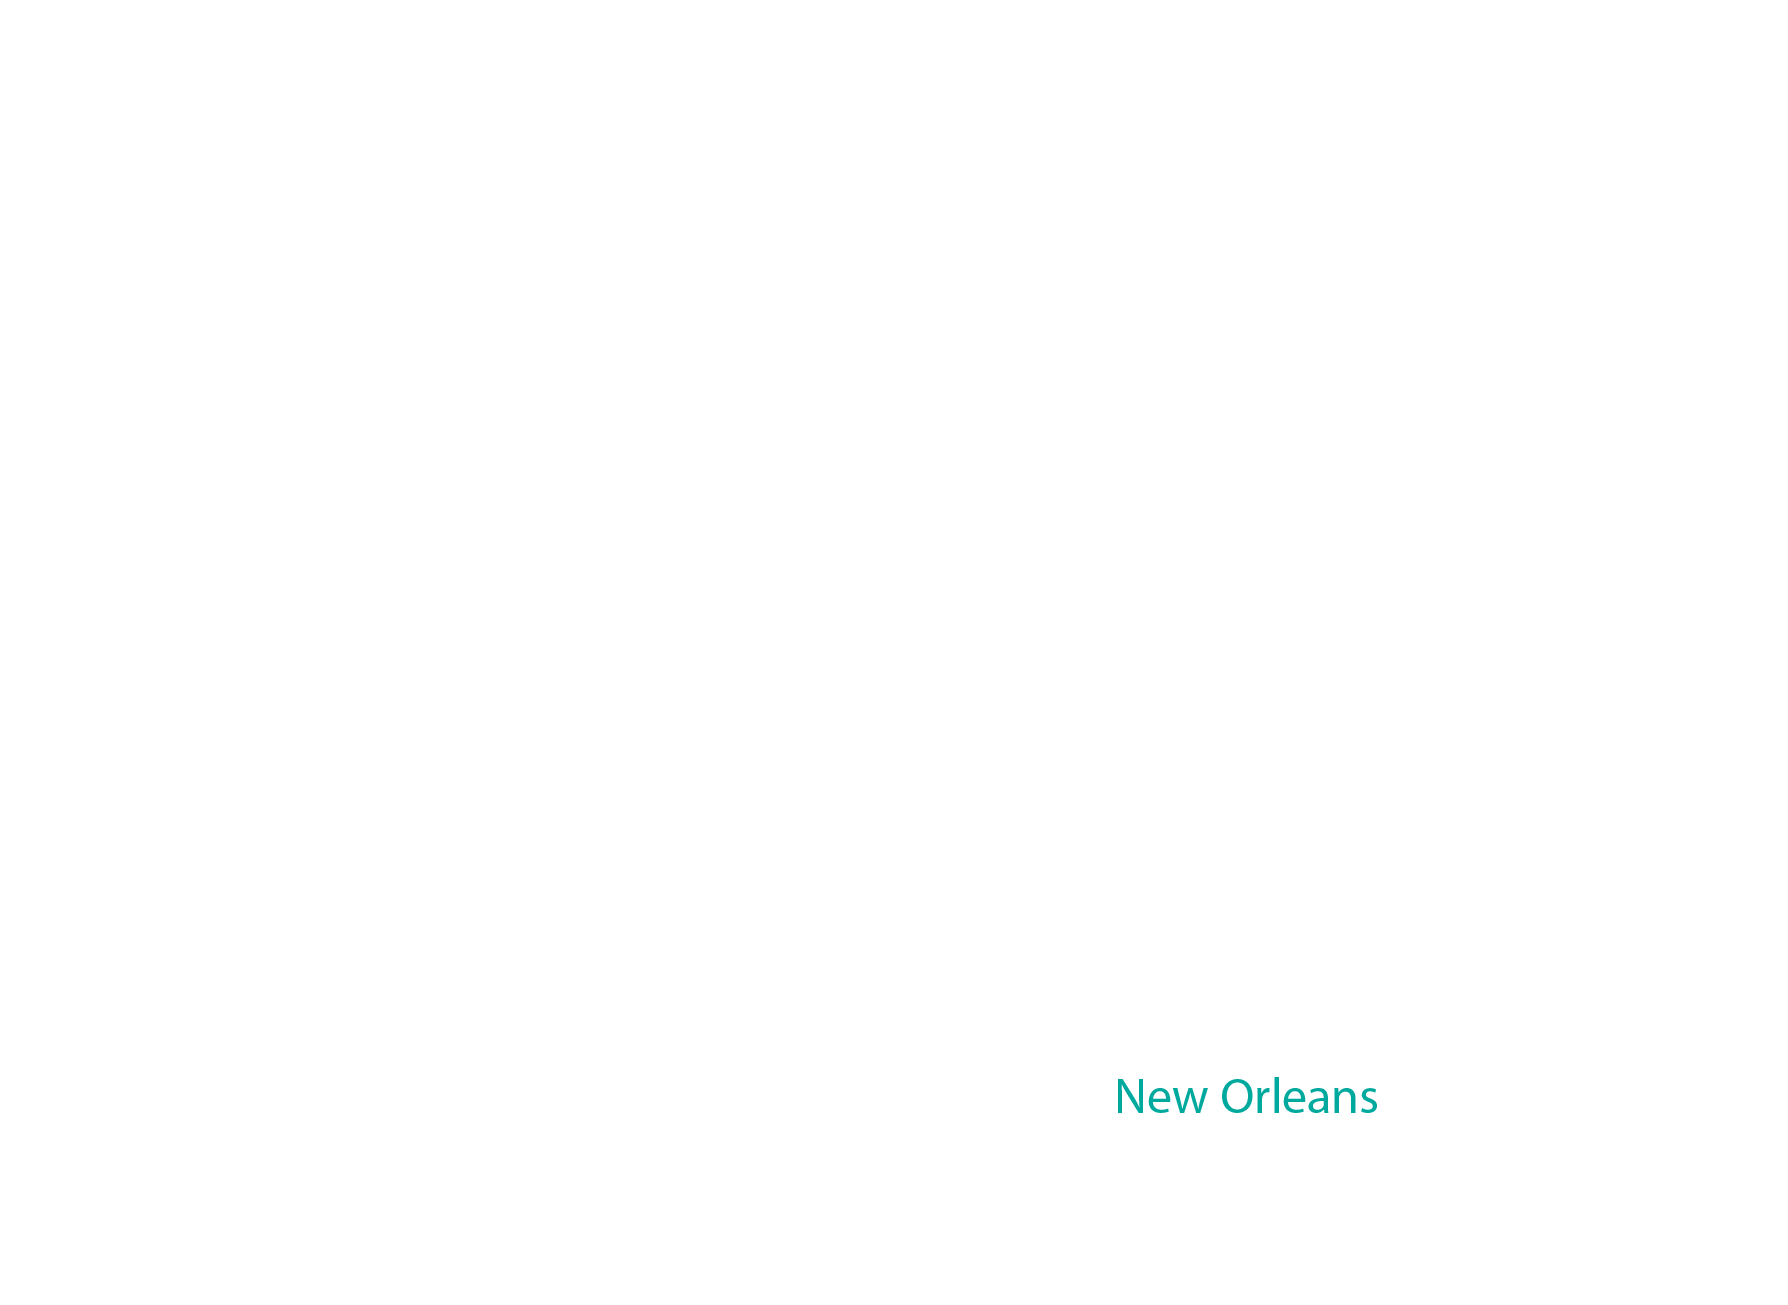 New-Orleans label